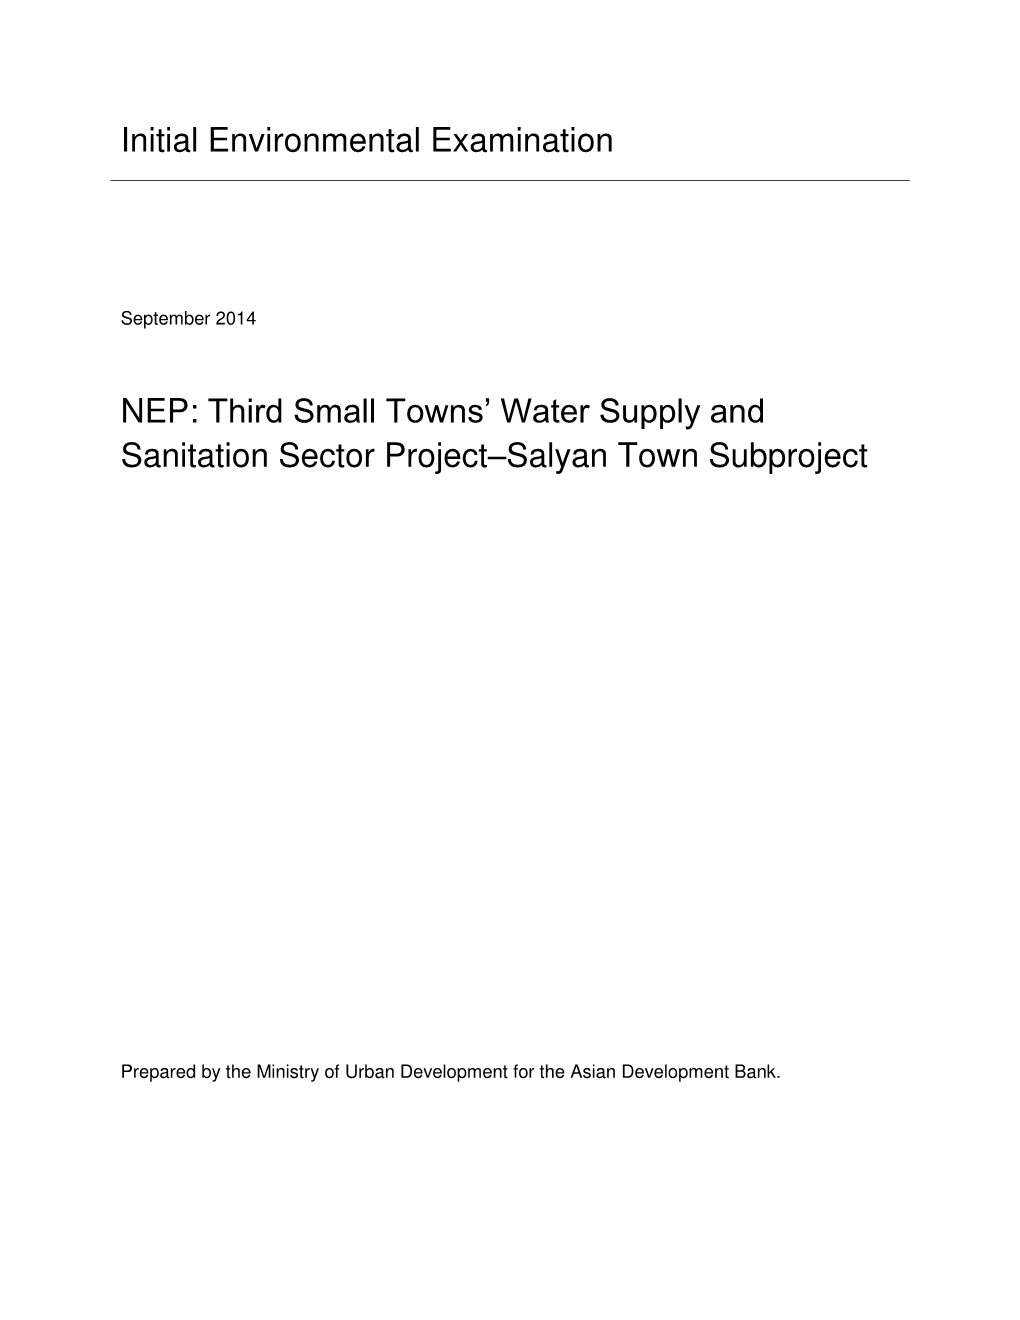 Third Small Towns' Water Supply and Sanitation Sector Project: Salyan